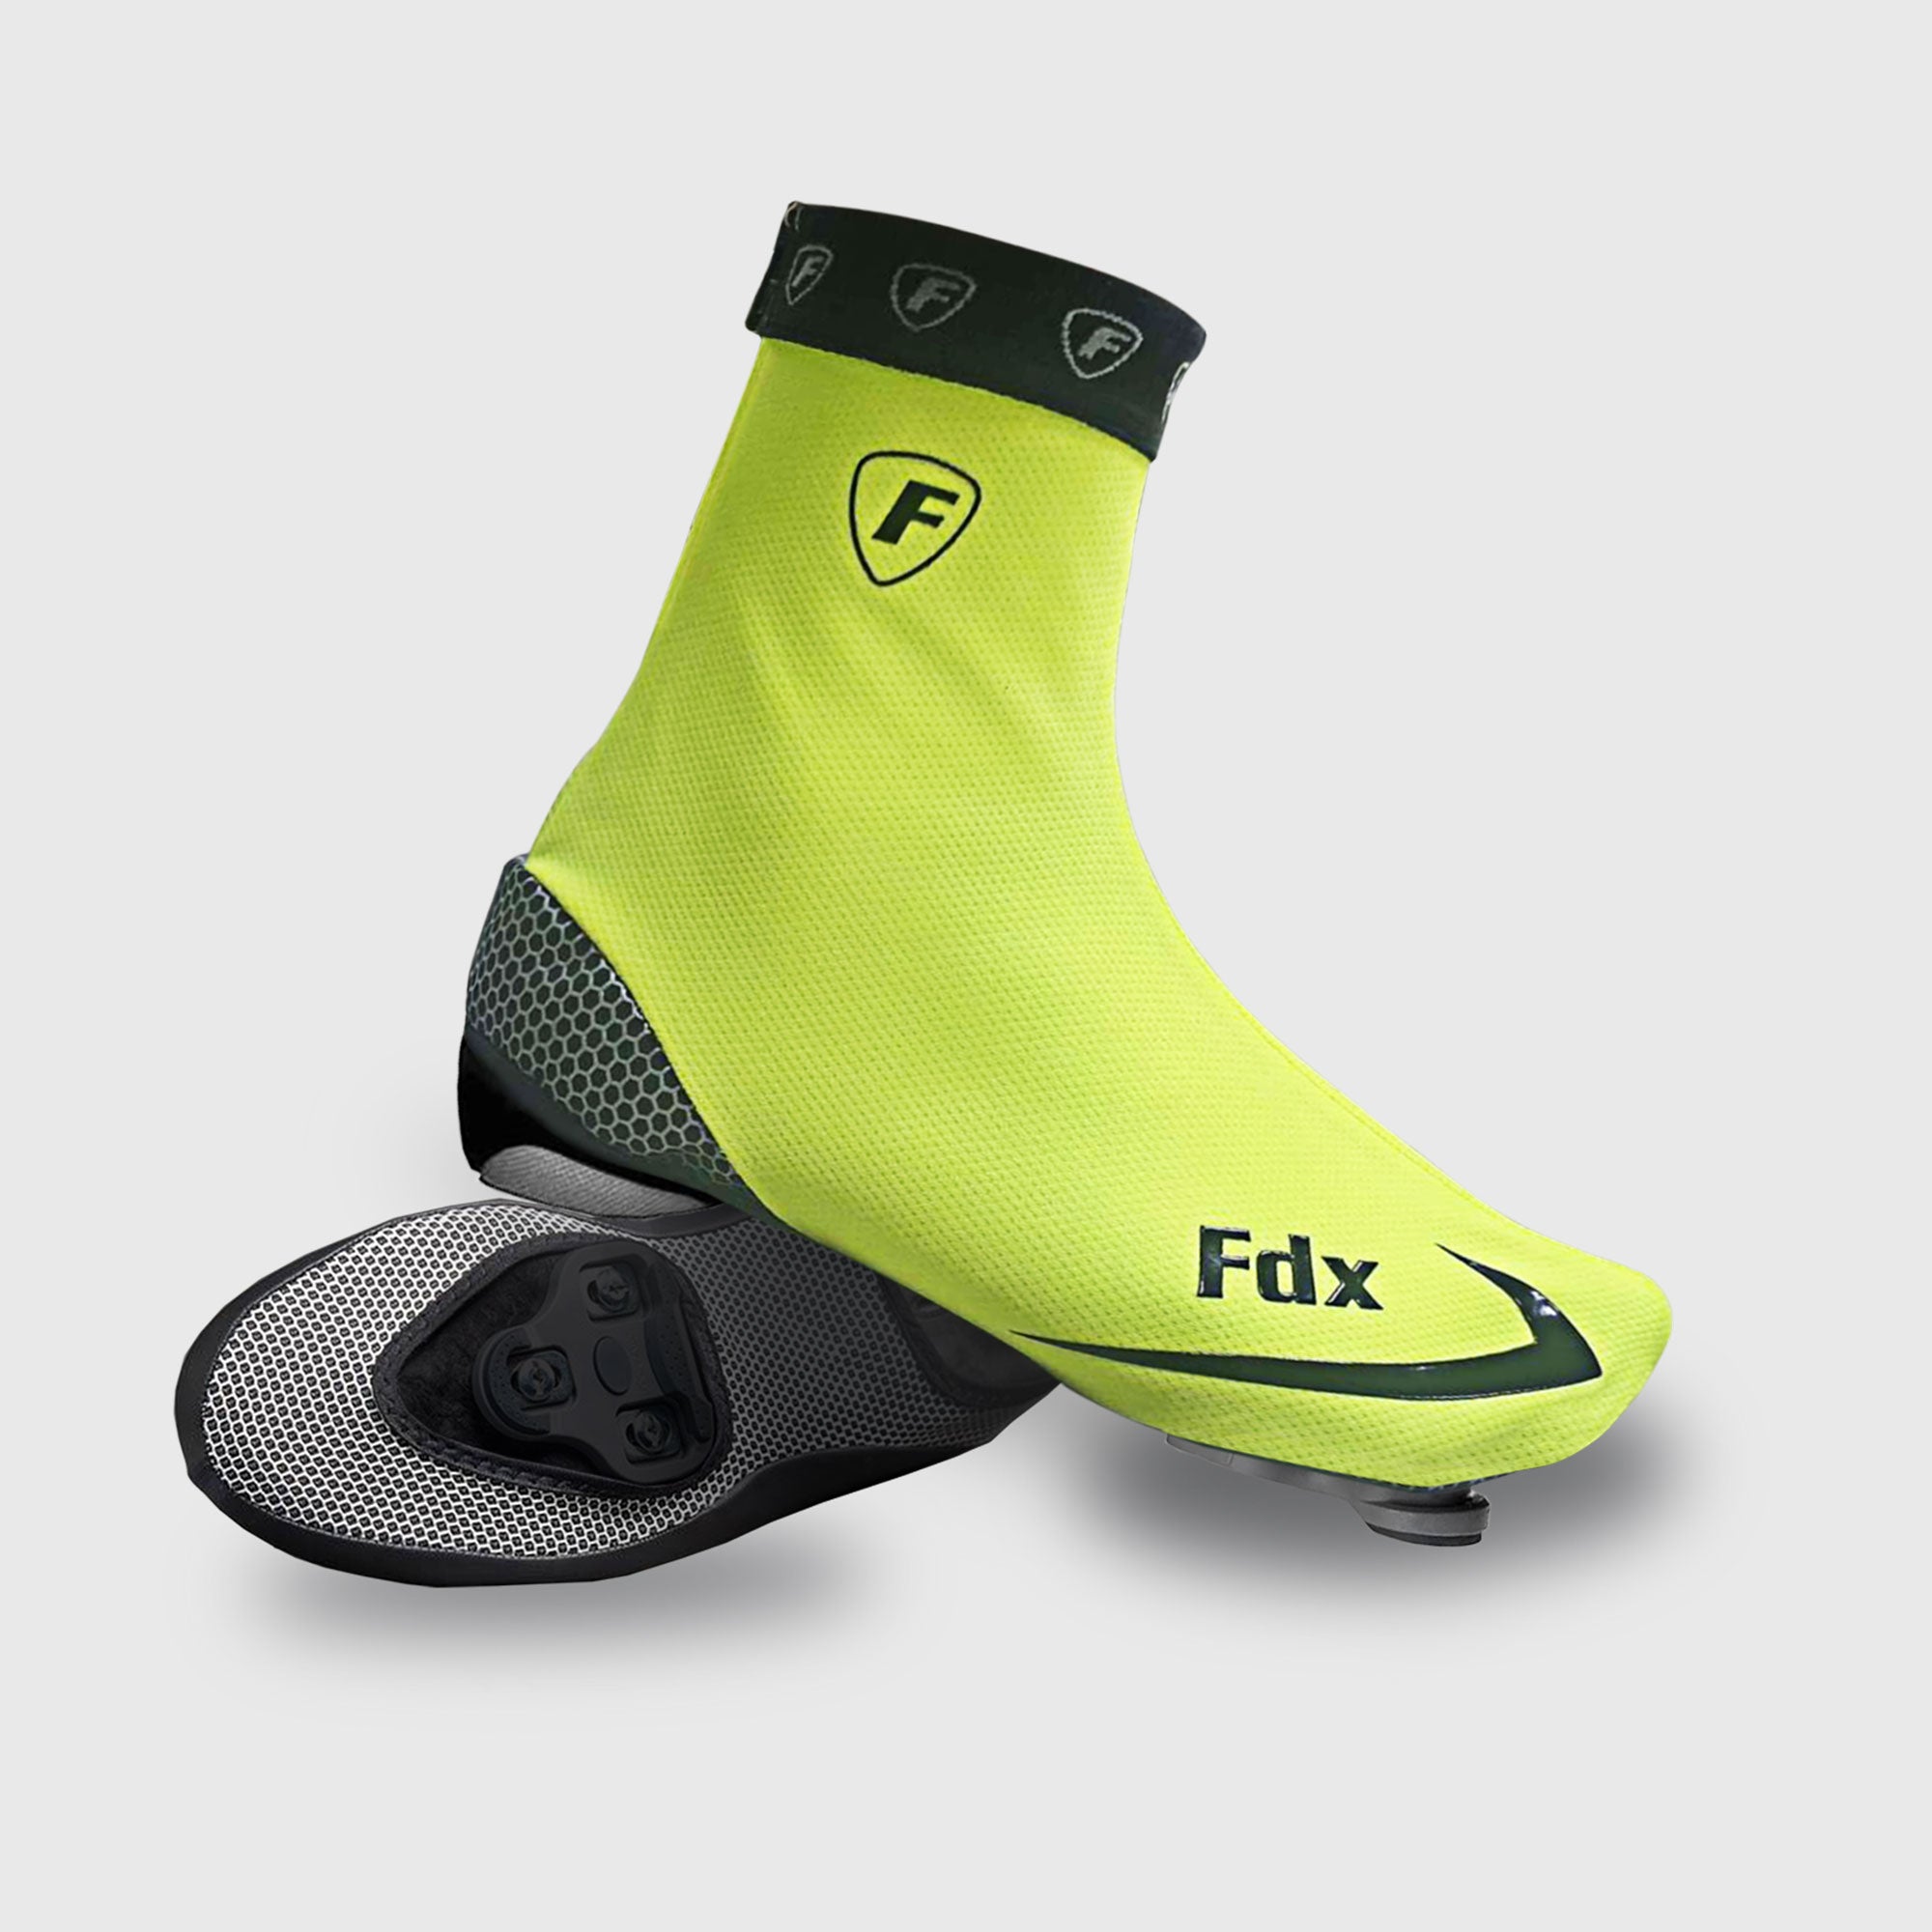 Fdx SC2 Fluorescent Yellow Cycling Shoe Covers